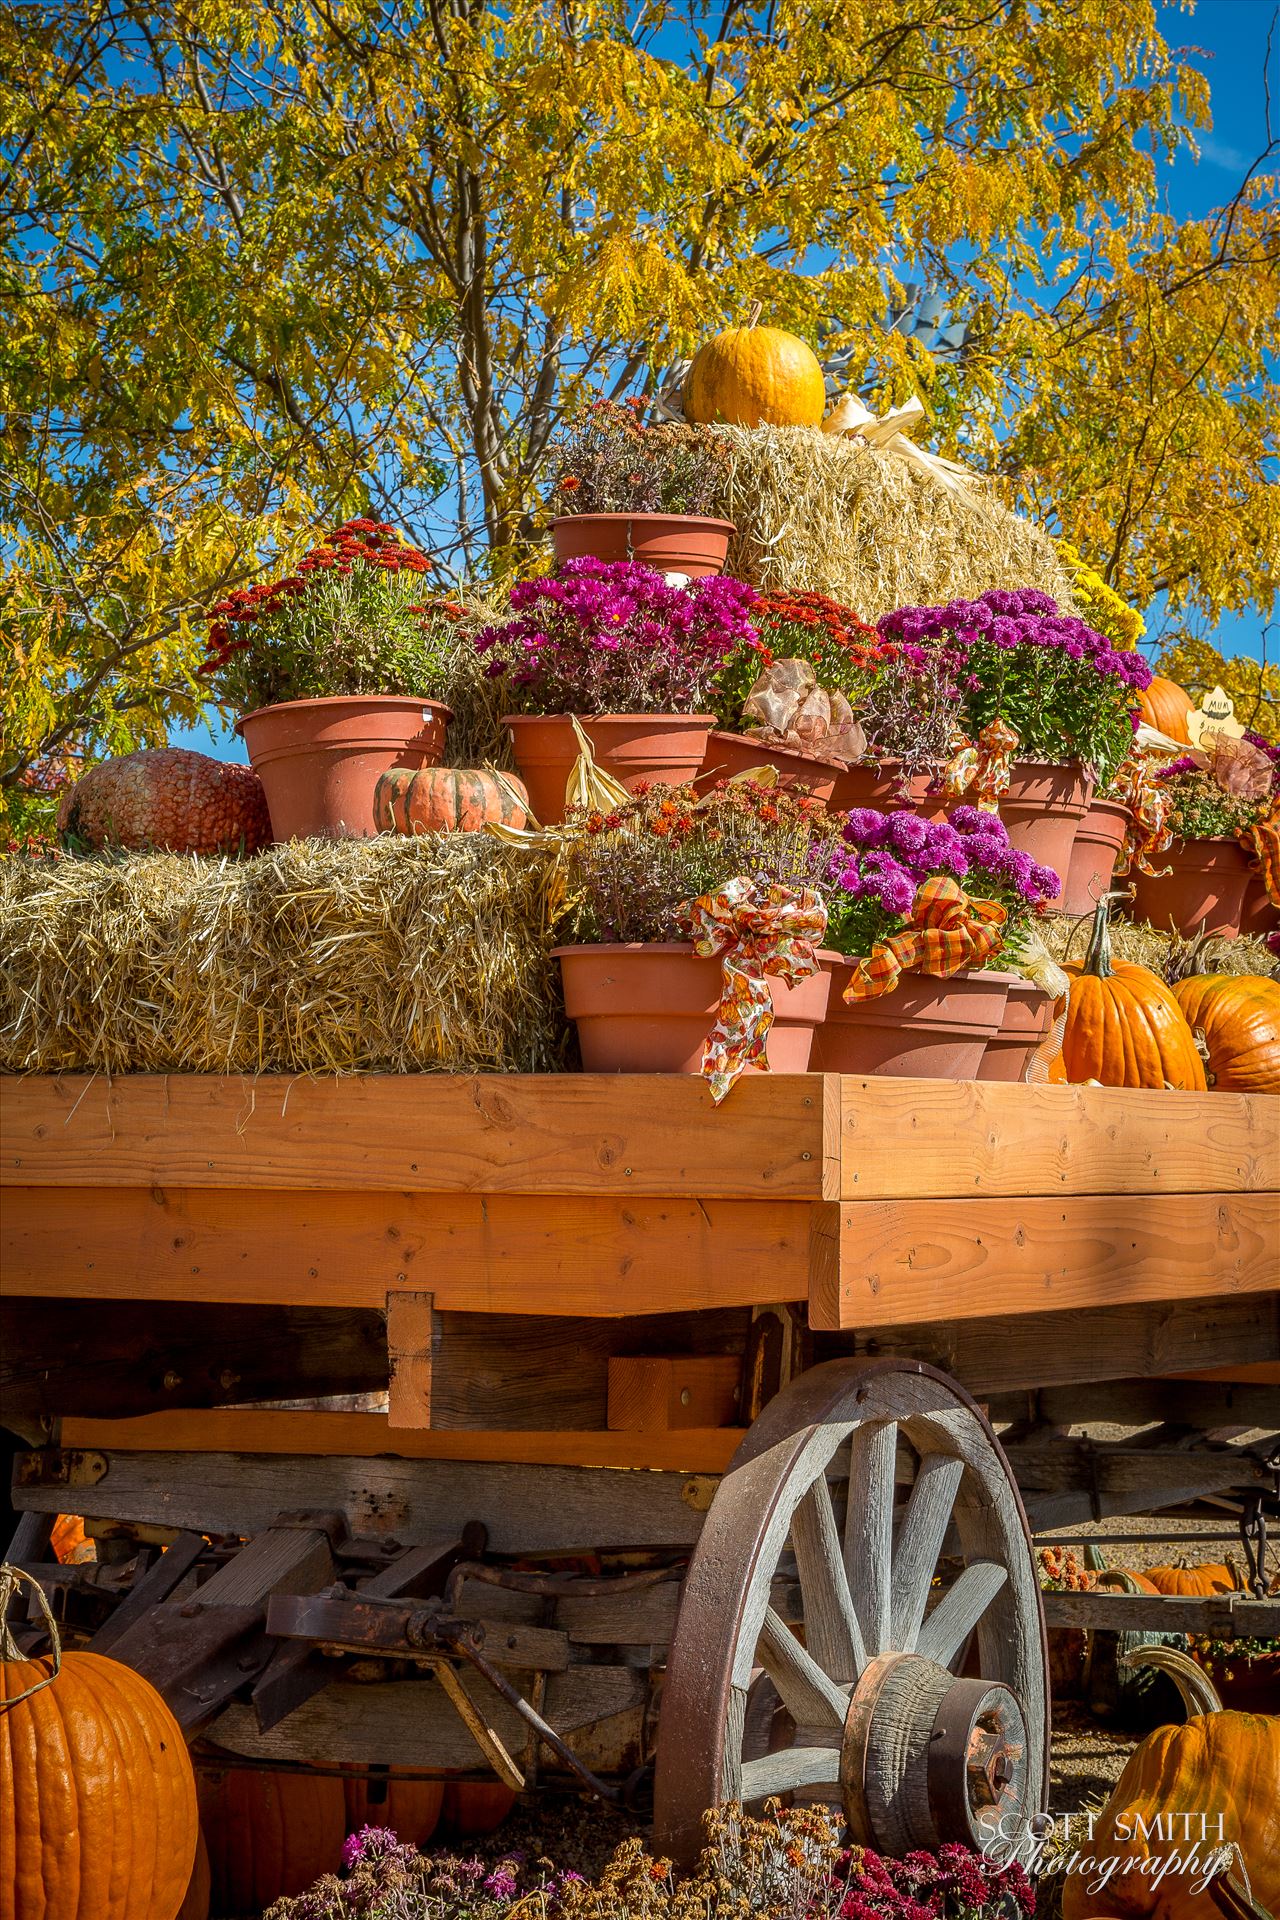 Bounty A wagon full of fall flowers and pumpkins - from Anderson Farms, Erie Colorado. by Scott Smith Photos